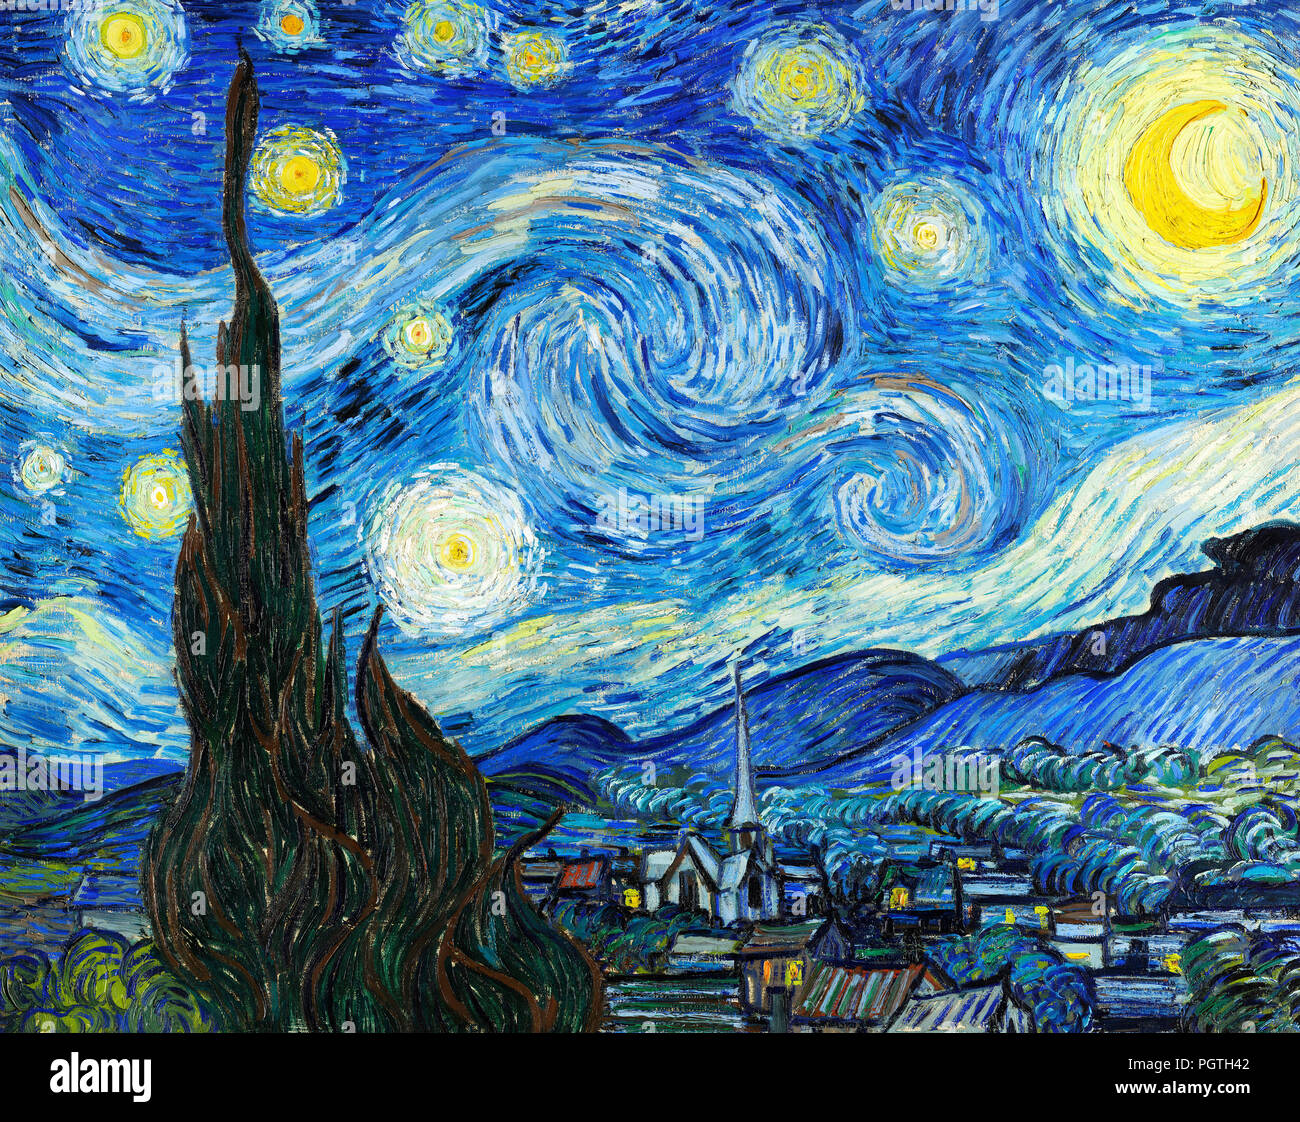 Van Gogh, Starry Night. "The Starry Night" by Vincent van Gogh (1853-1890), oil on canvas, 1889 Stock Photo